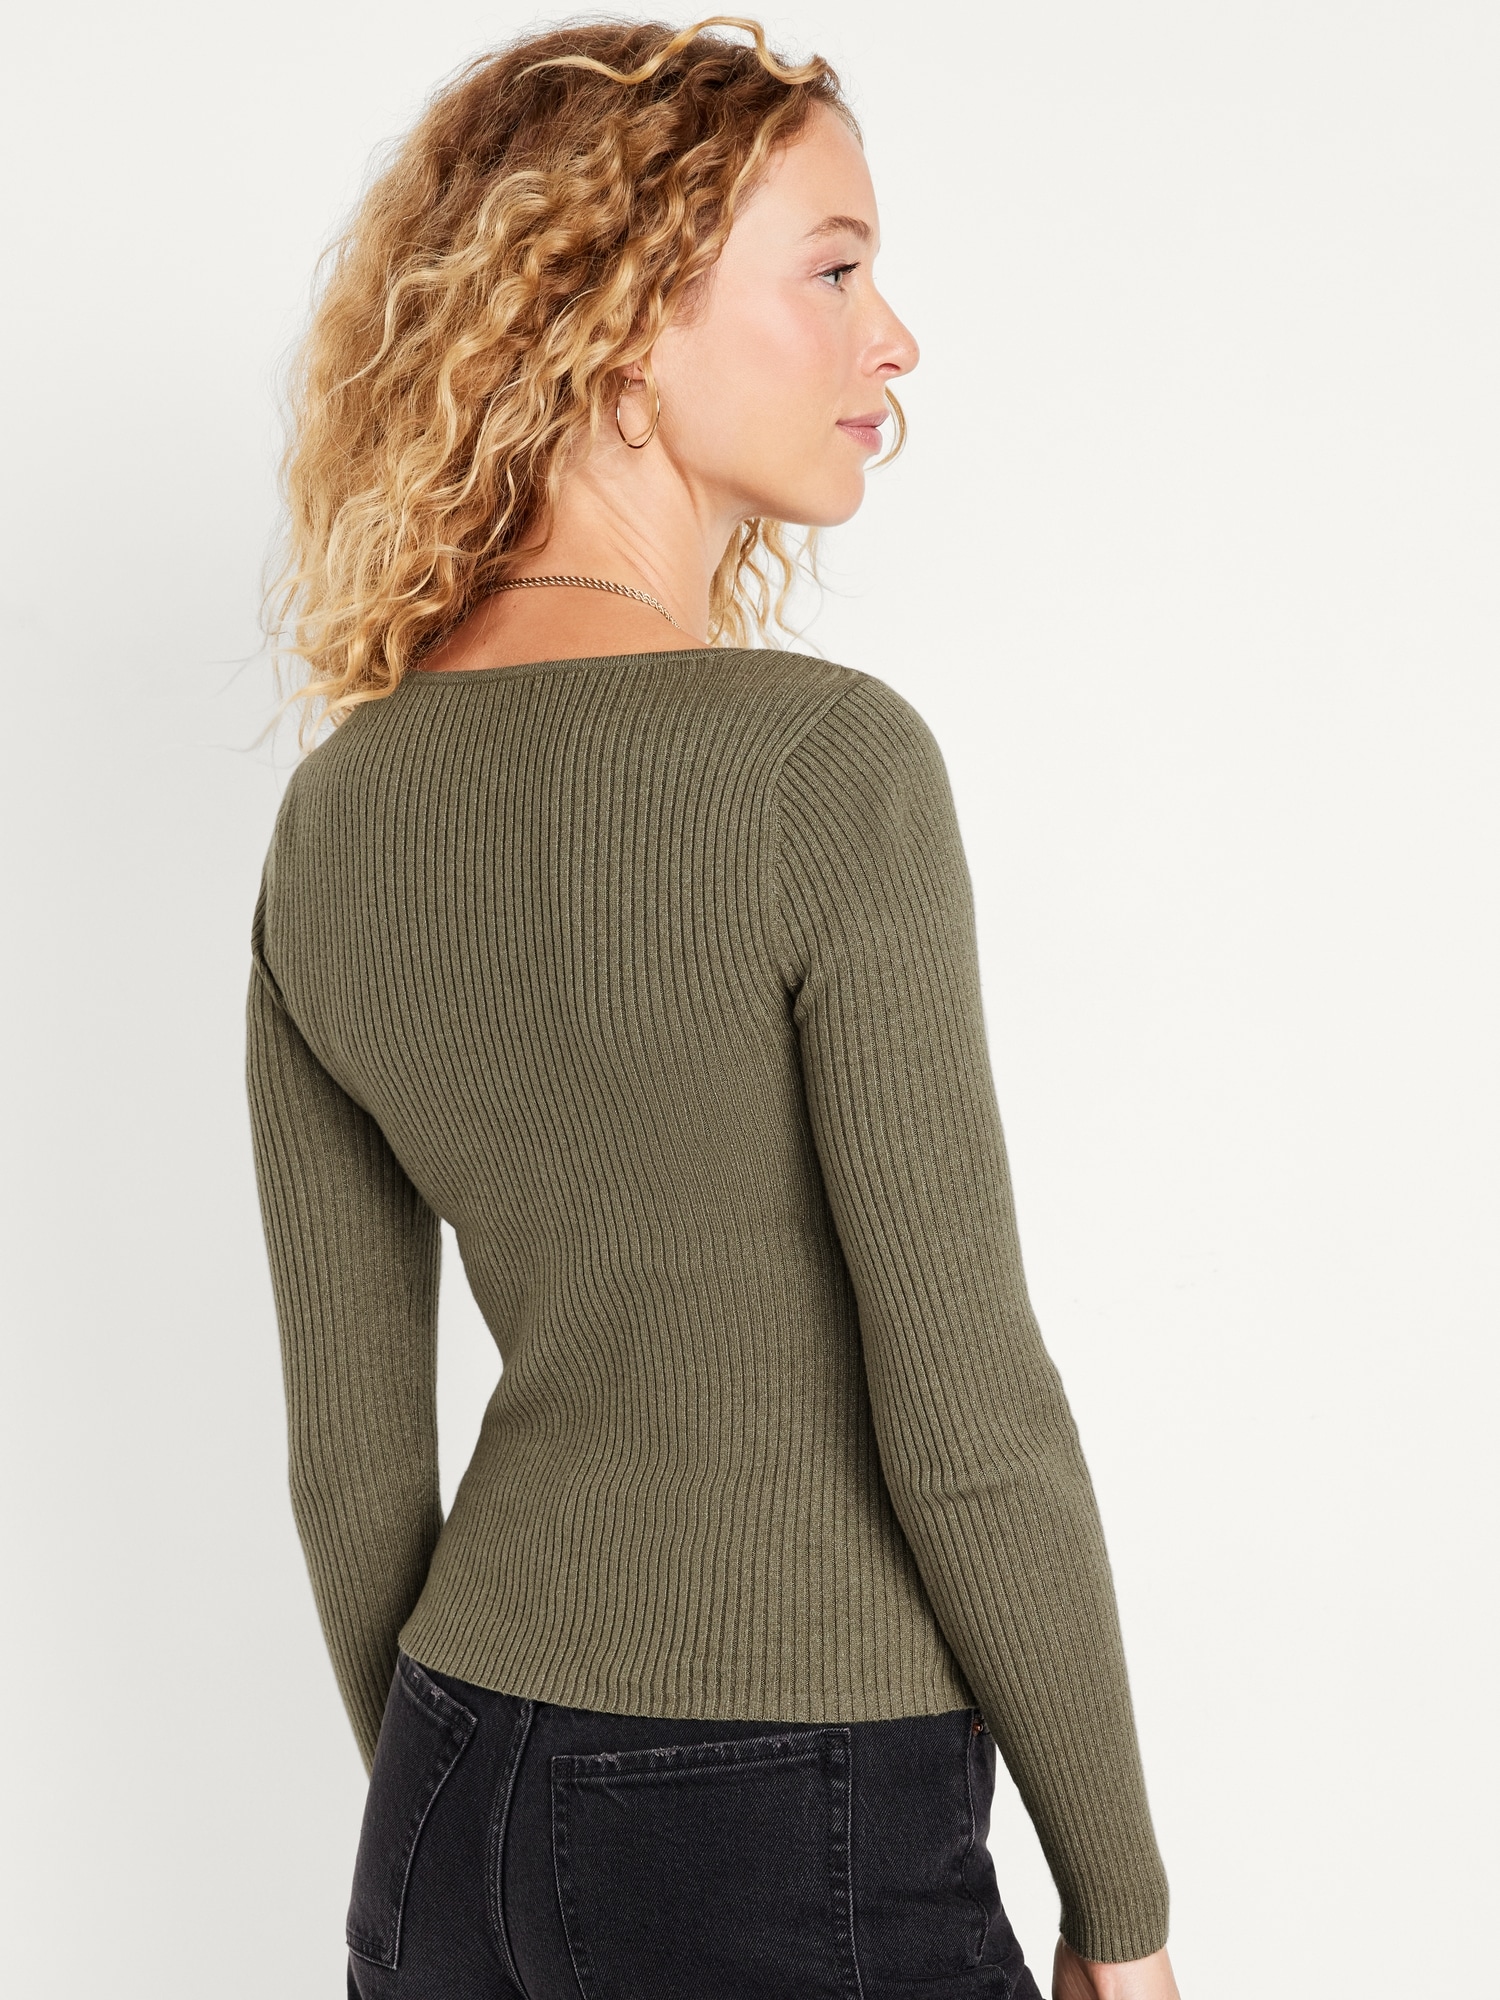 Fitted Rib-Knit Sweater